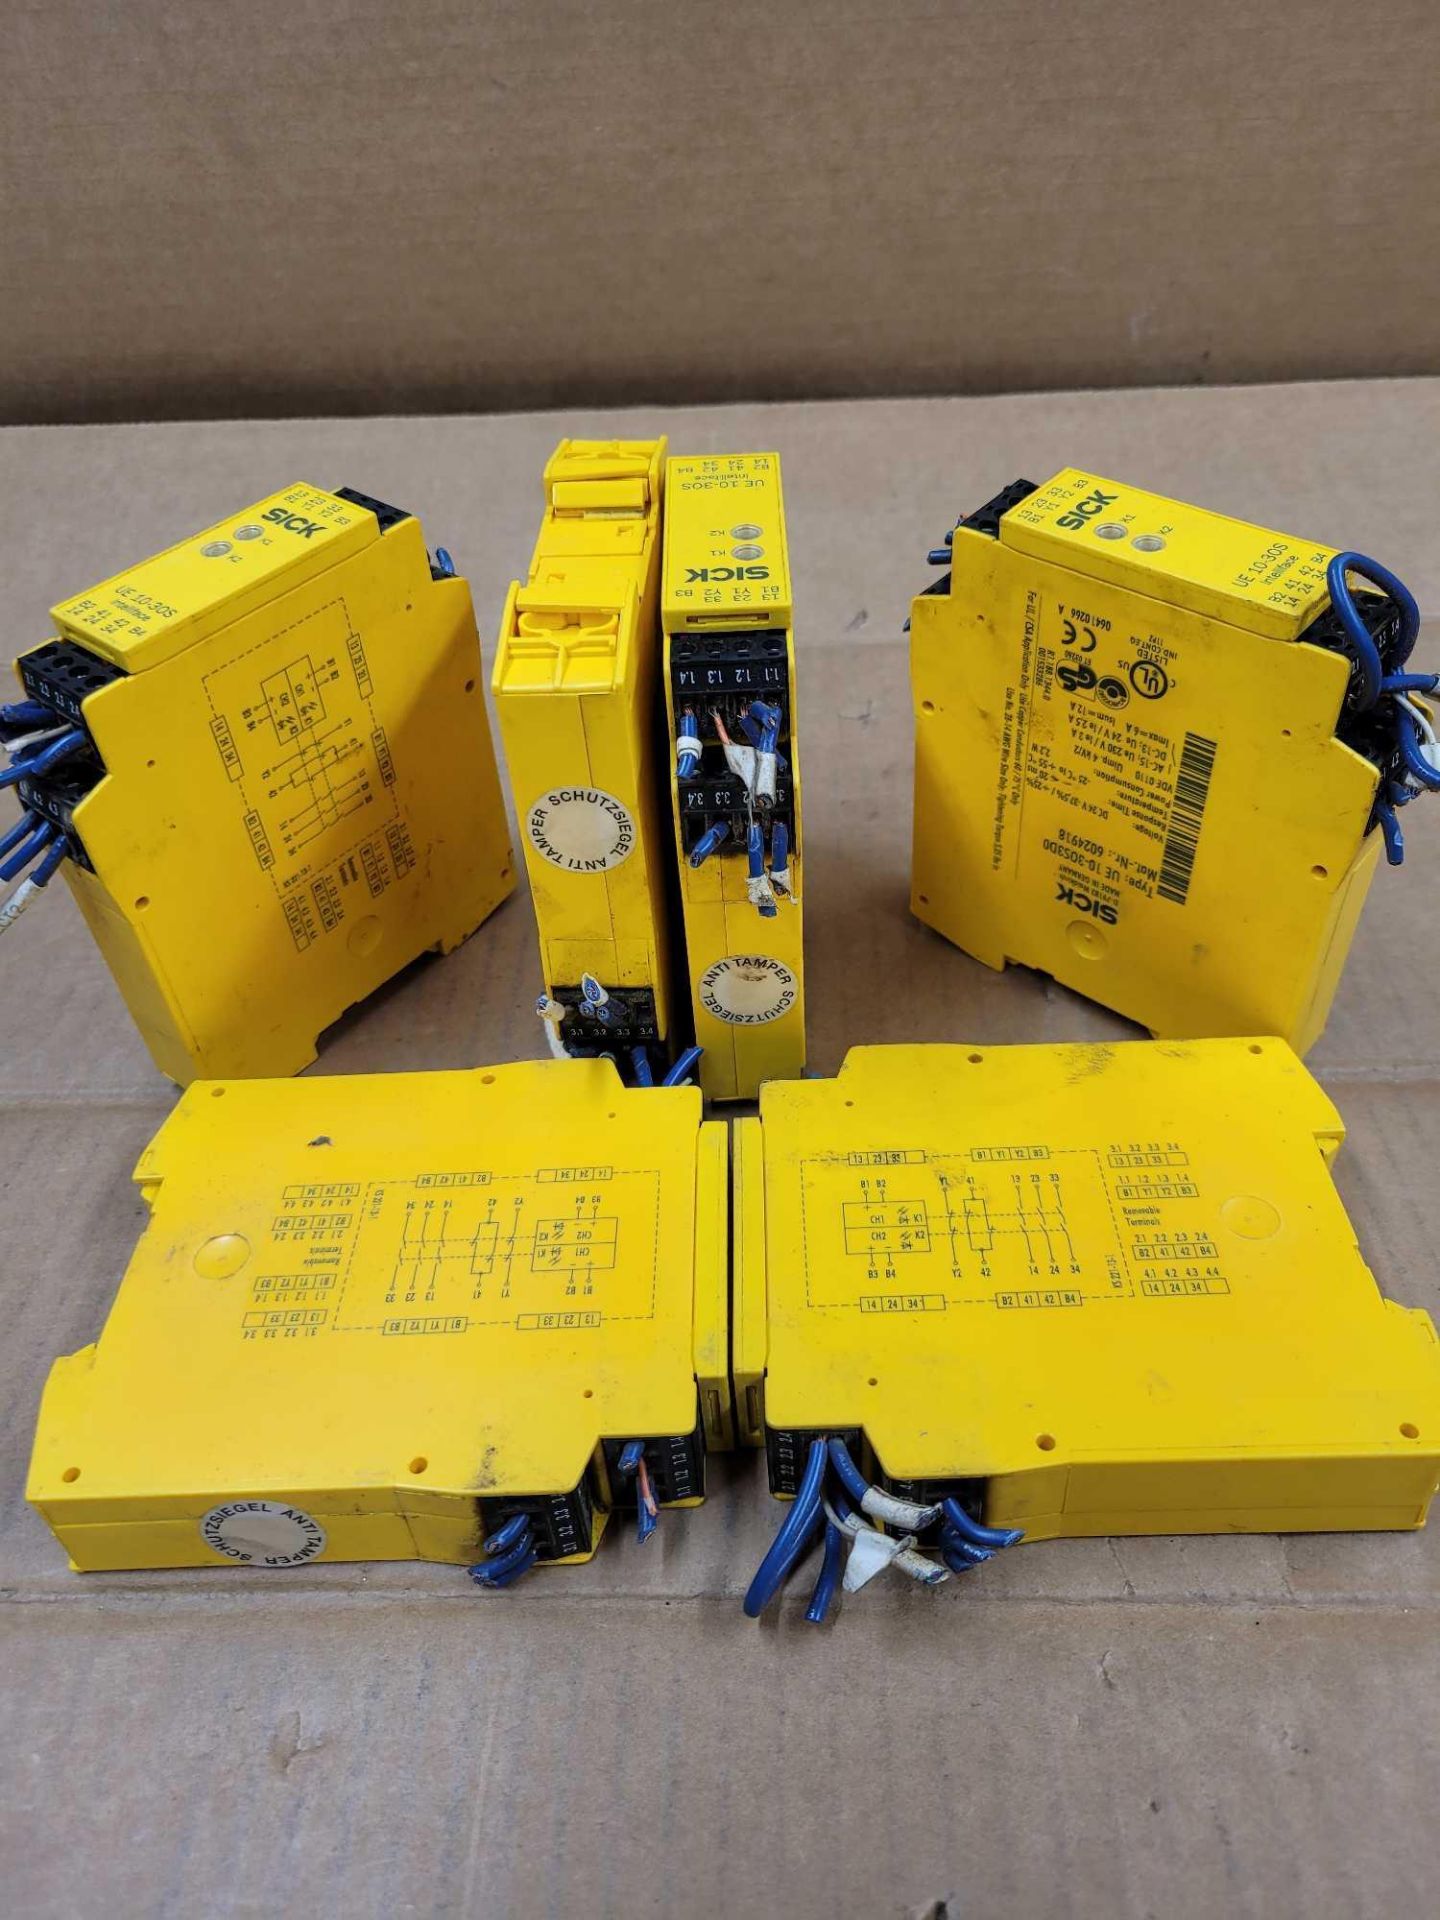 LOT OF 6 SICK UE10-30S3D0 / Safety Relay / Lot Weight: 2.8 lbs - Image 6 of 6